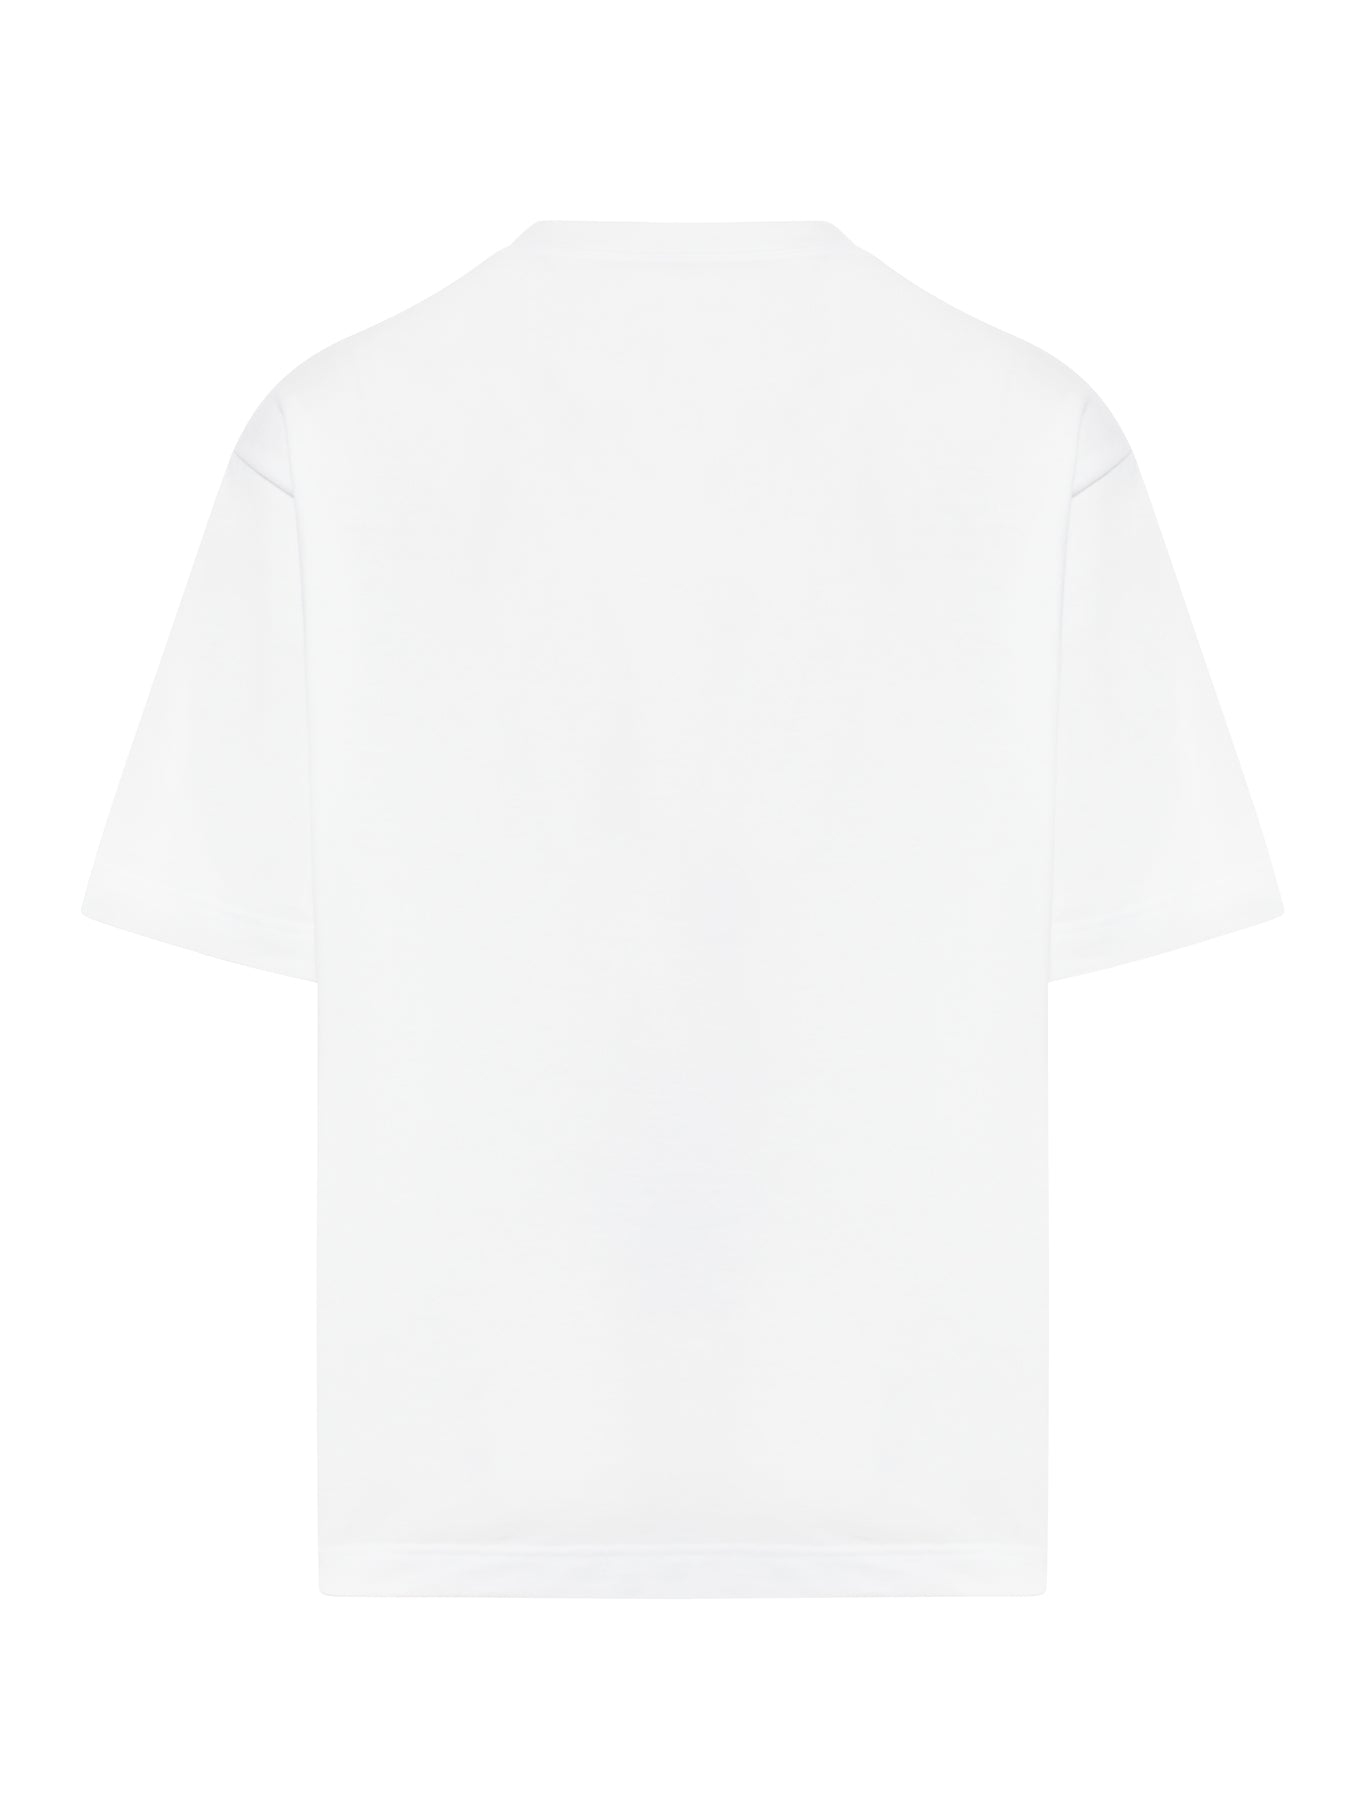 COTTON JERSEY T-SHIRT WITH GUCCI PRINT